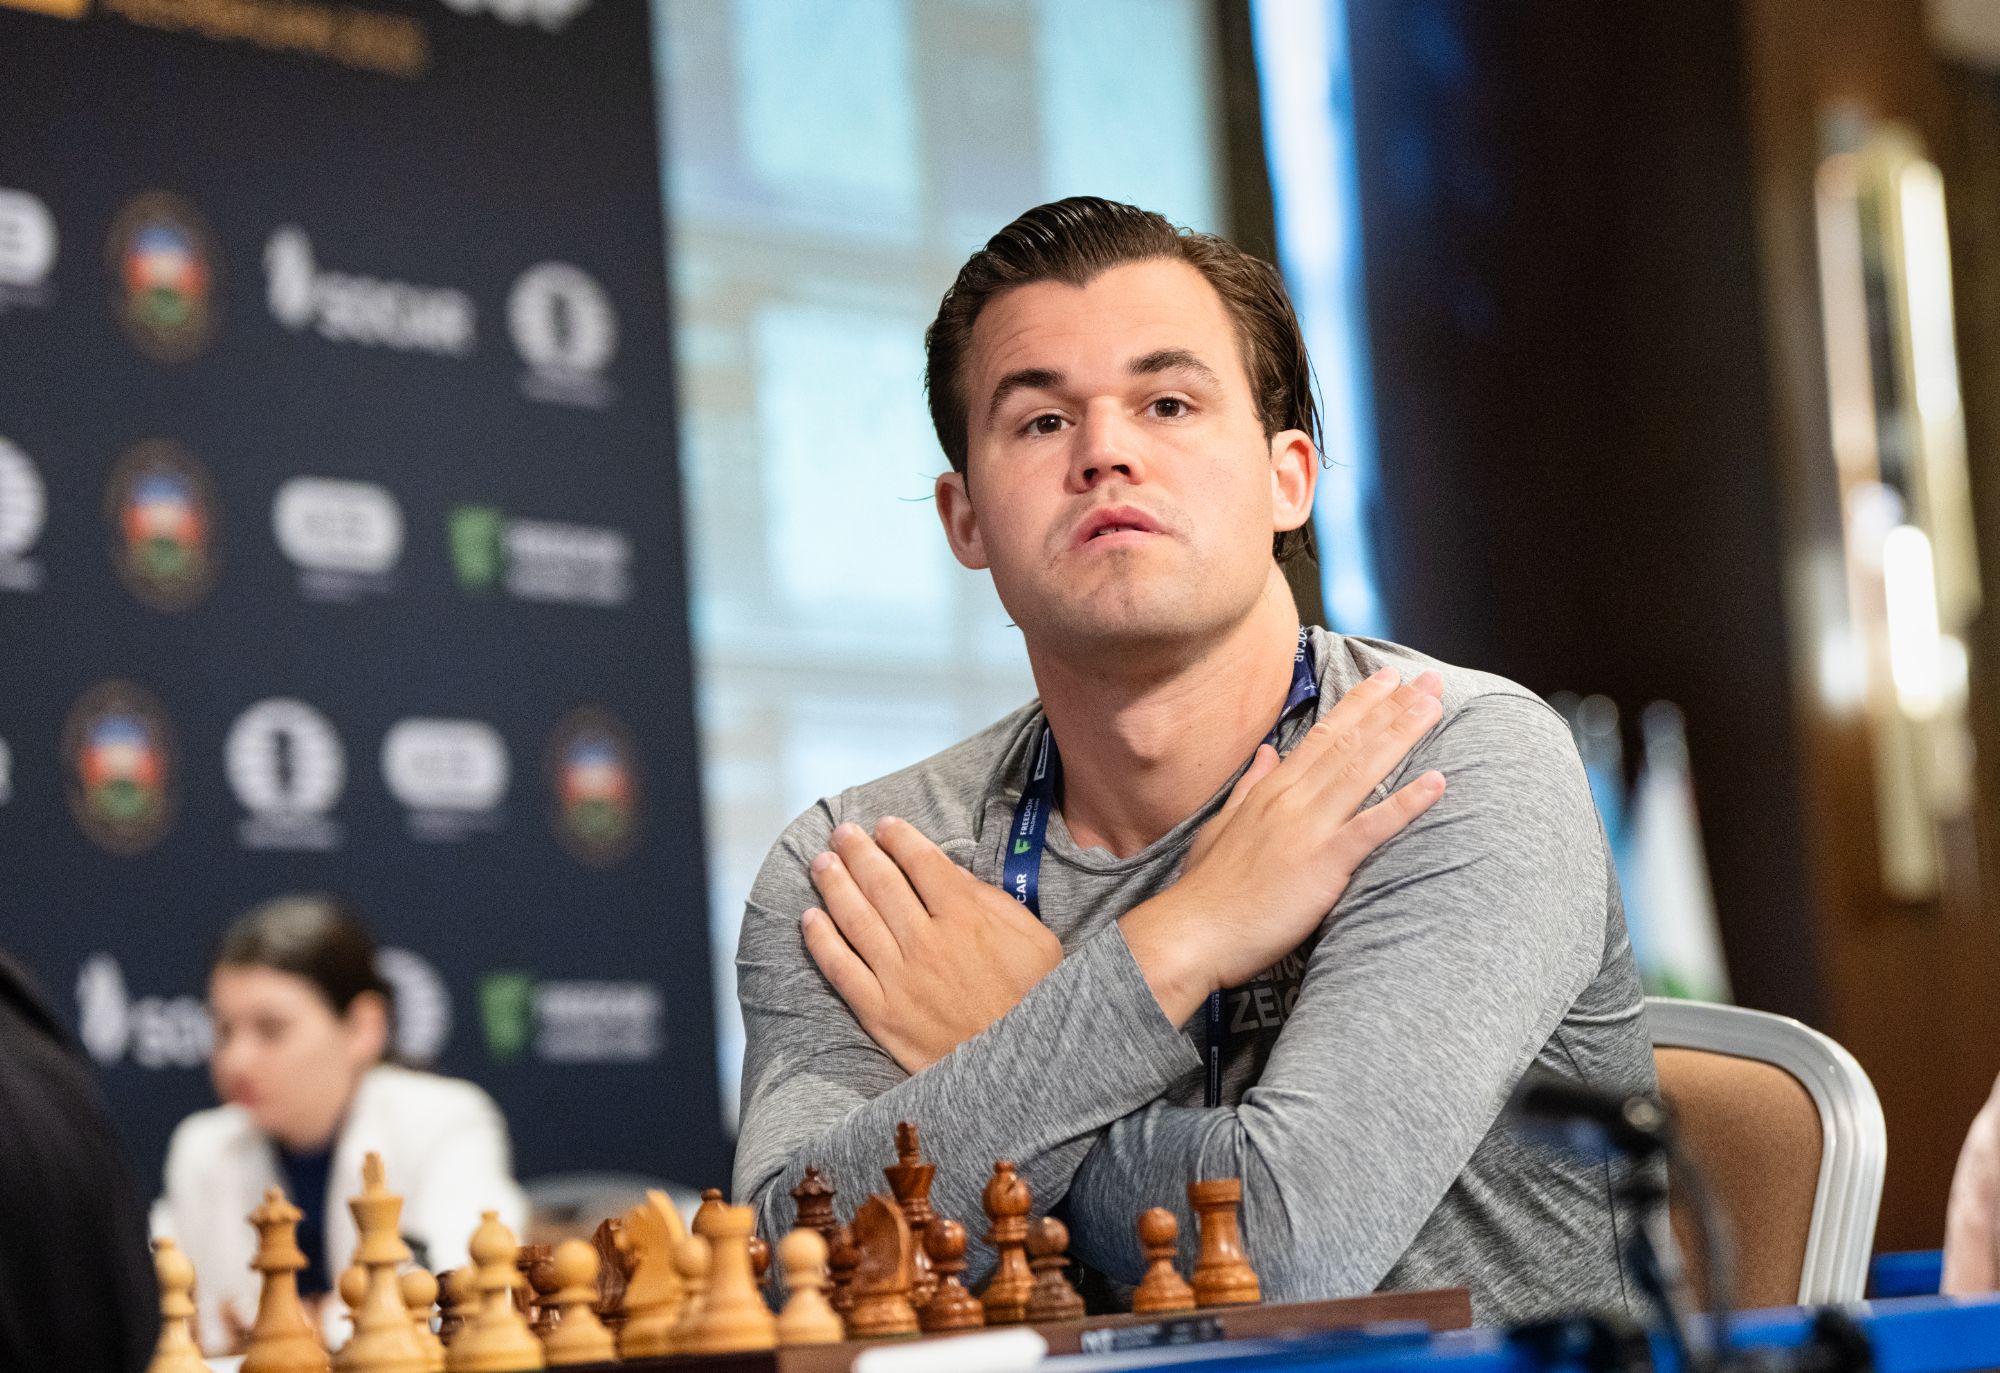 ratings in 2021 too prove that Magnus Carlsen is a GOAT 